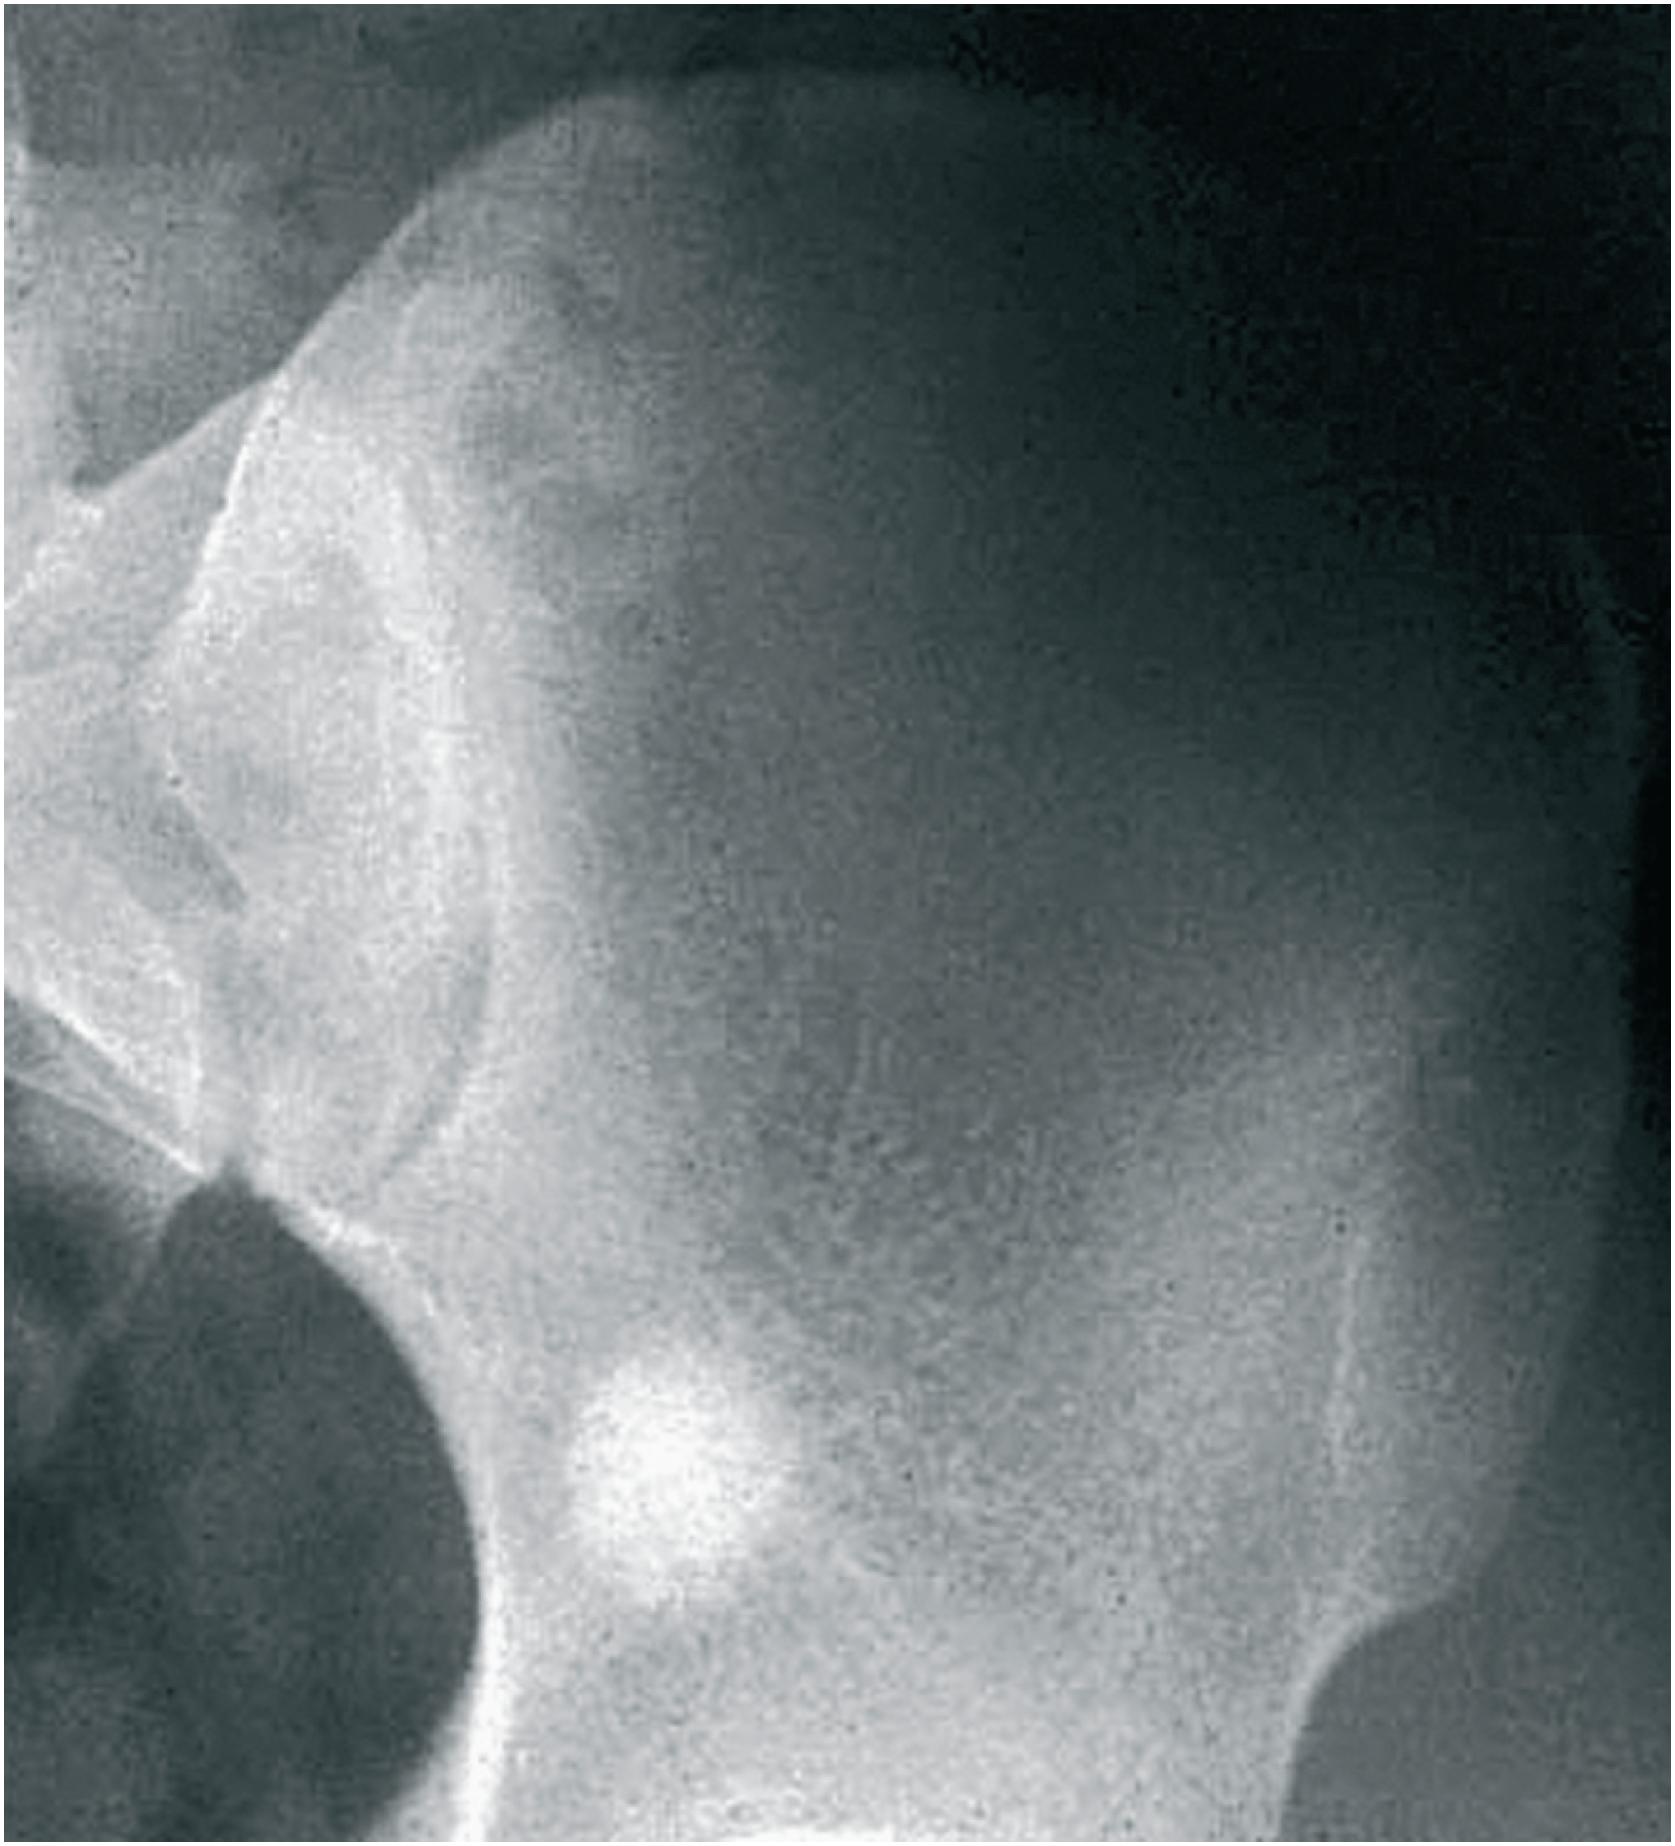 Fig. 16.1, Bone island involving the wing of the sacrum. The lesion is small, round, and radiodense.